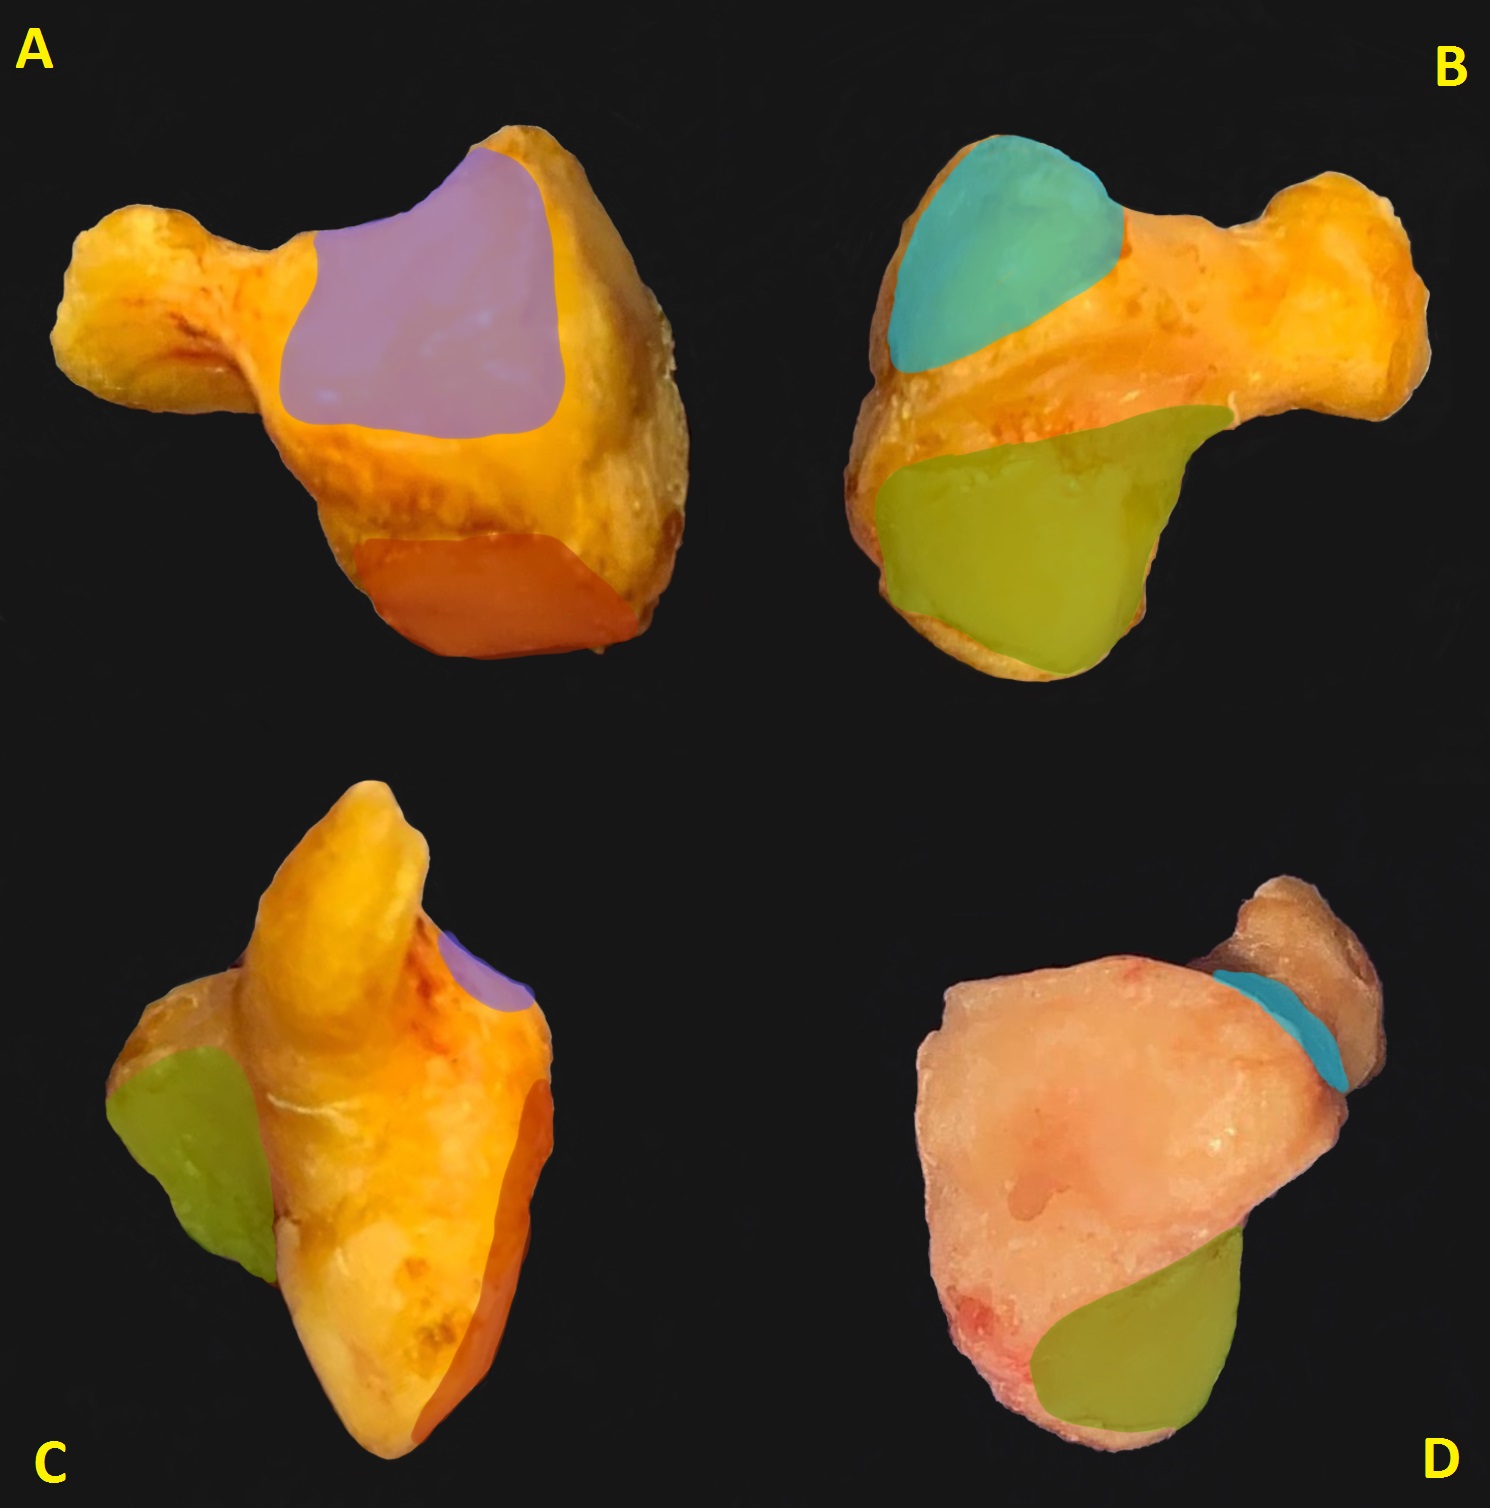 Figure 1. Fresh hamate bone dissection. Radial view (A) with articular surface for fourth metacarpal (violet) and capitate bone (red). Ulnar view (B) showing fifth metacarpal articular surface (light blue) and triquetrum (green). Volar view (C). Dorsal view (D).